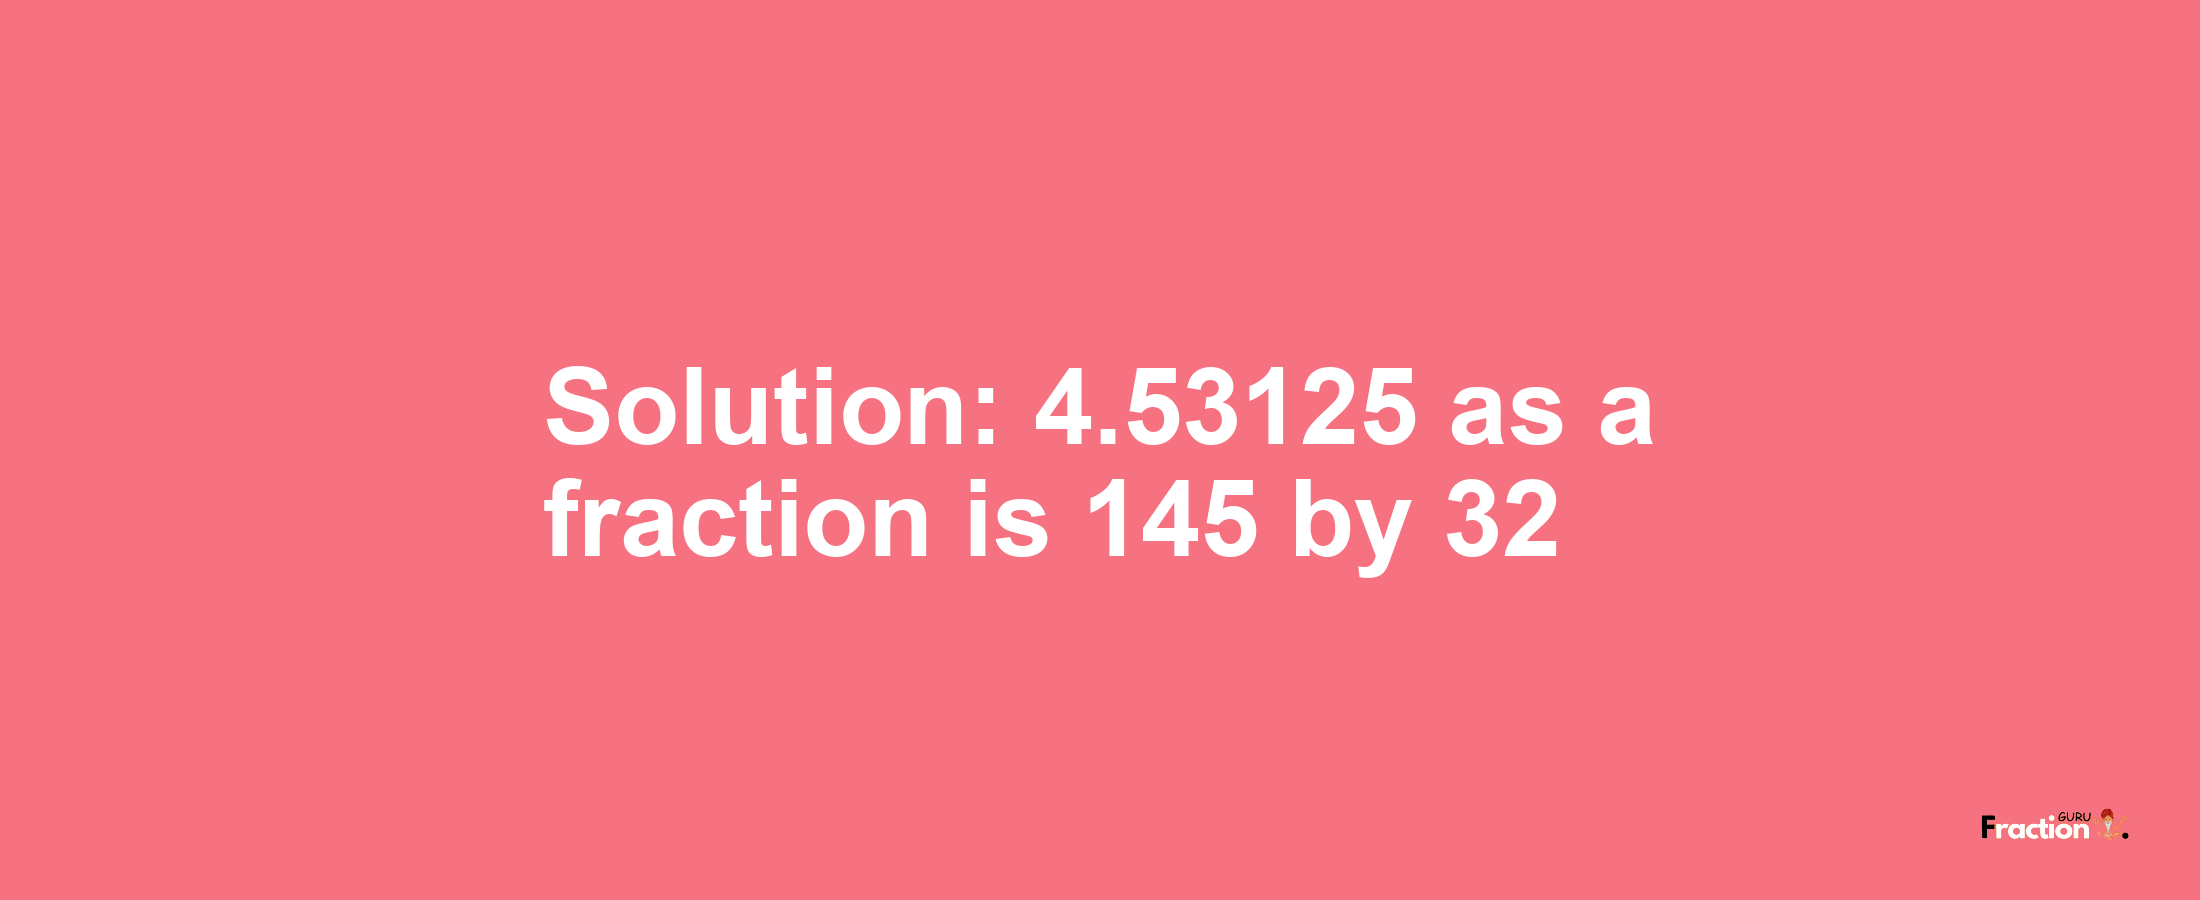 Solution:4.53125 as a fraction is 145/32